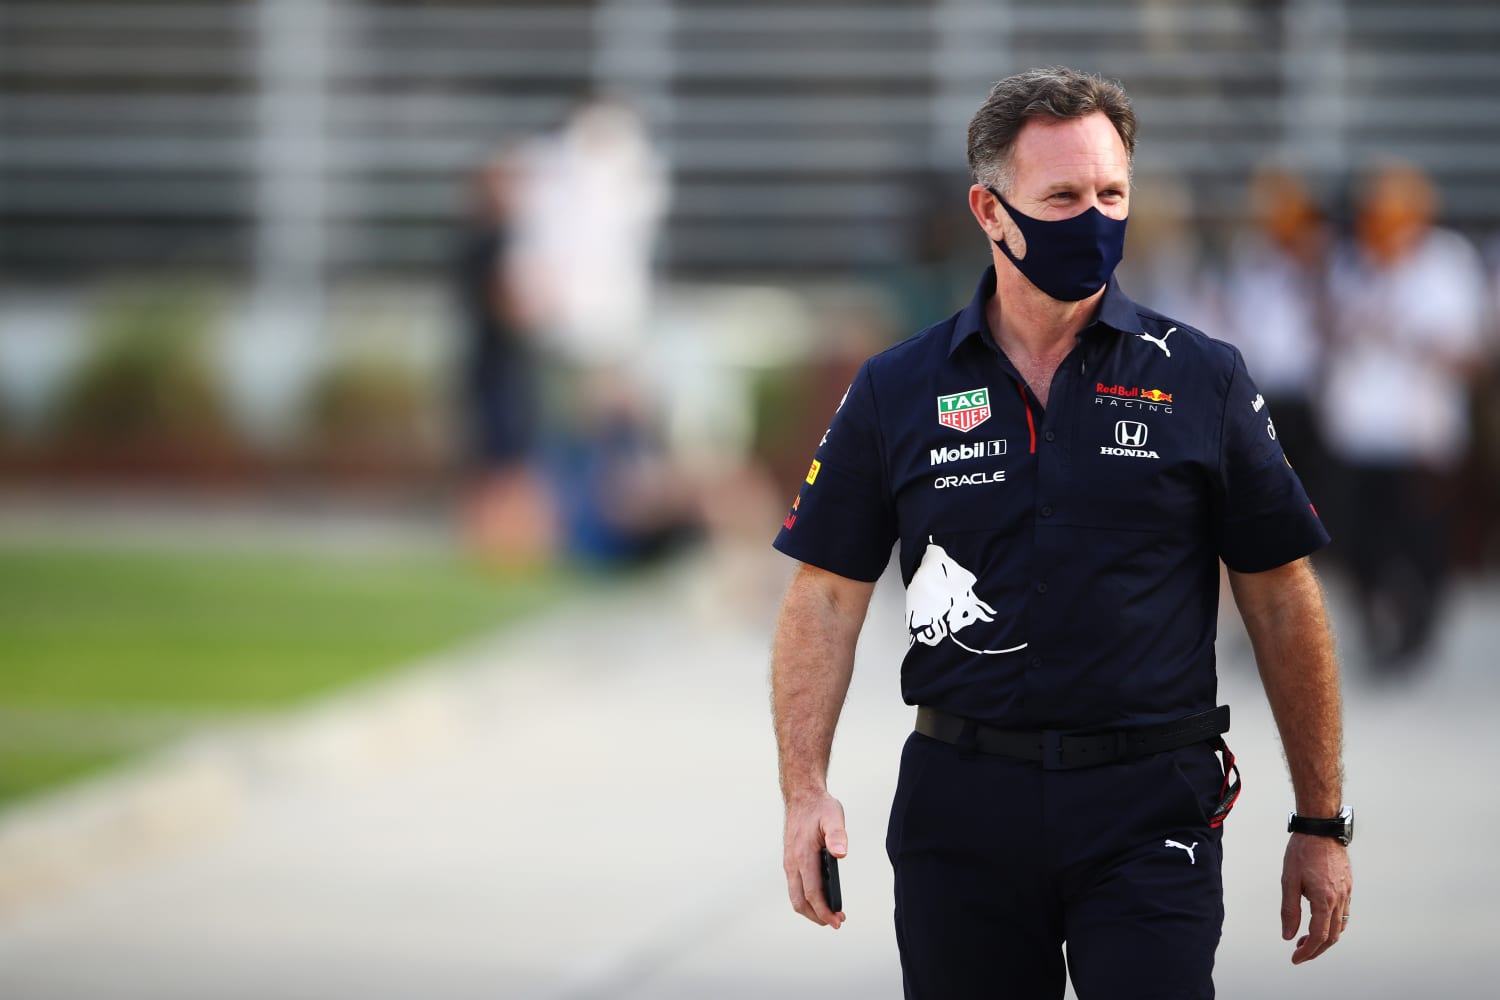 Pivotal moments are driven by data”: Christian Horner on Red Bull